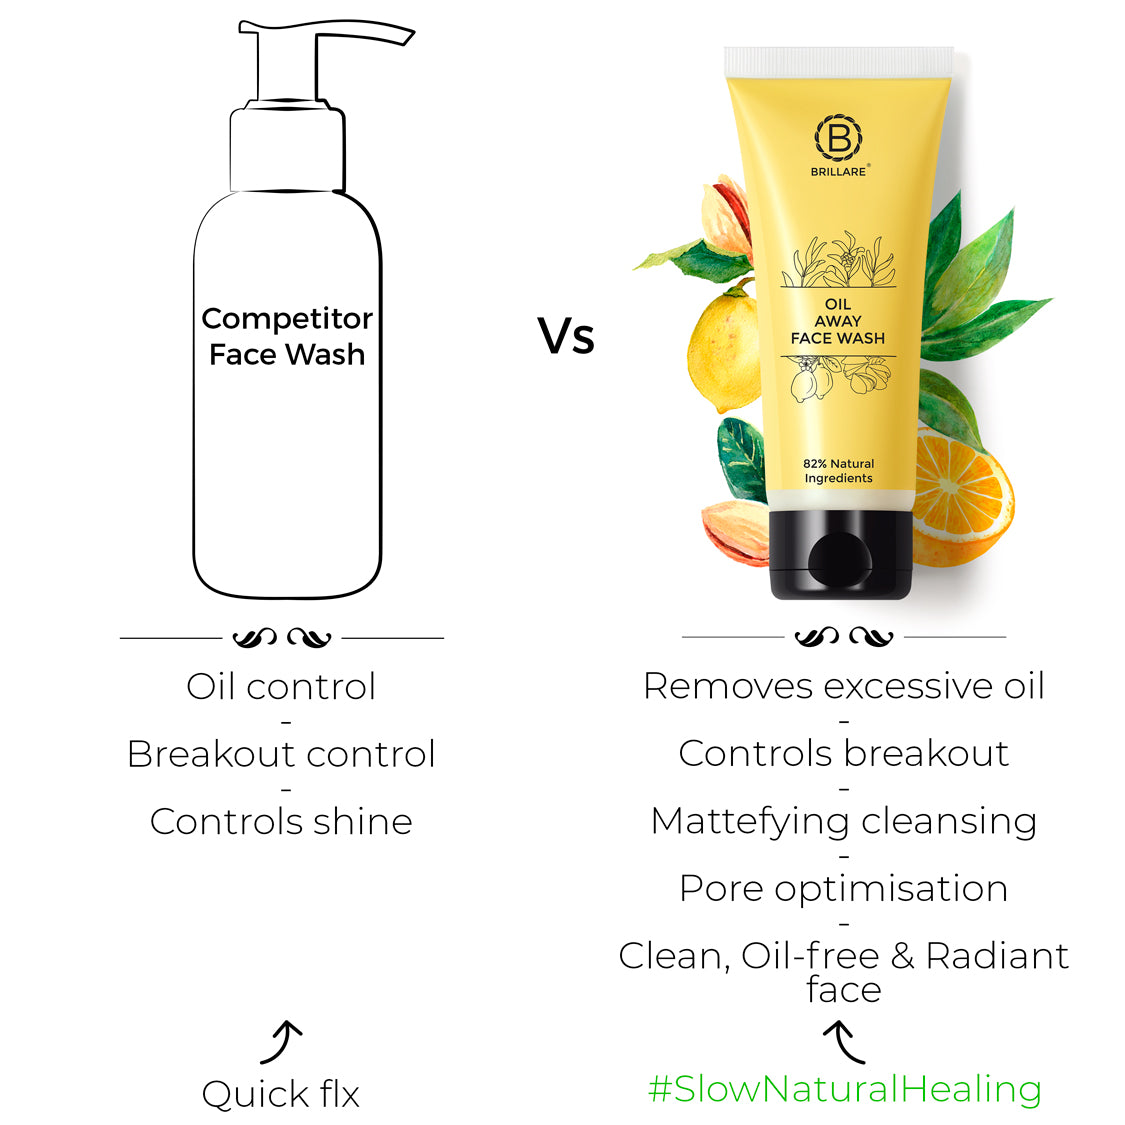 Oil Away Face Wash For Oily, Acne Prone Skin